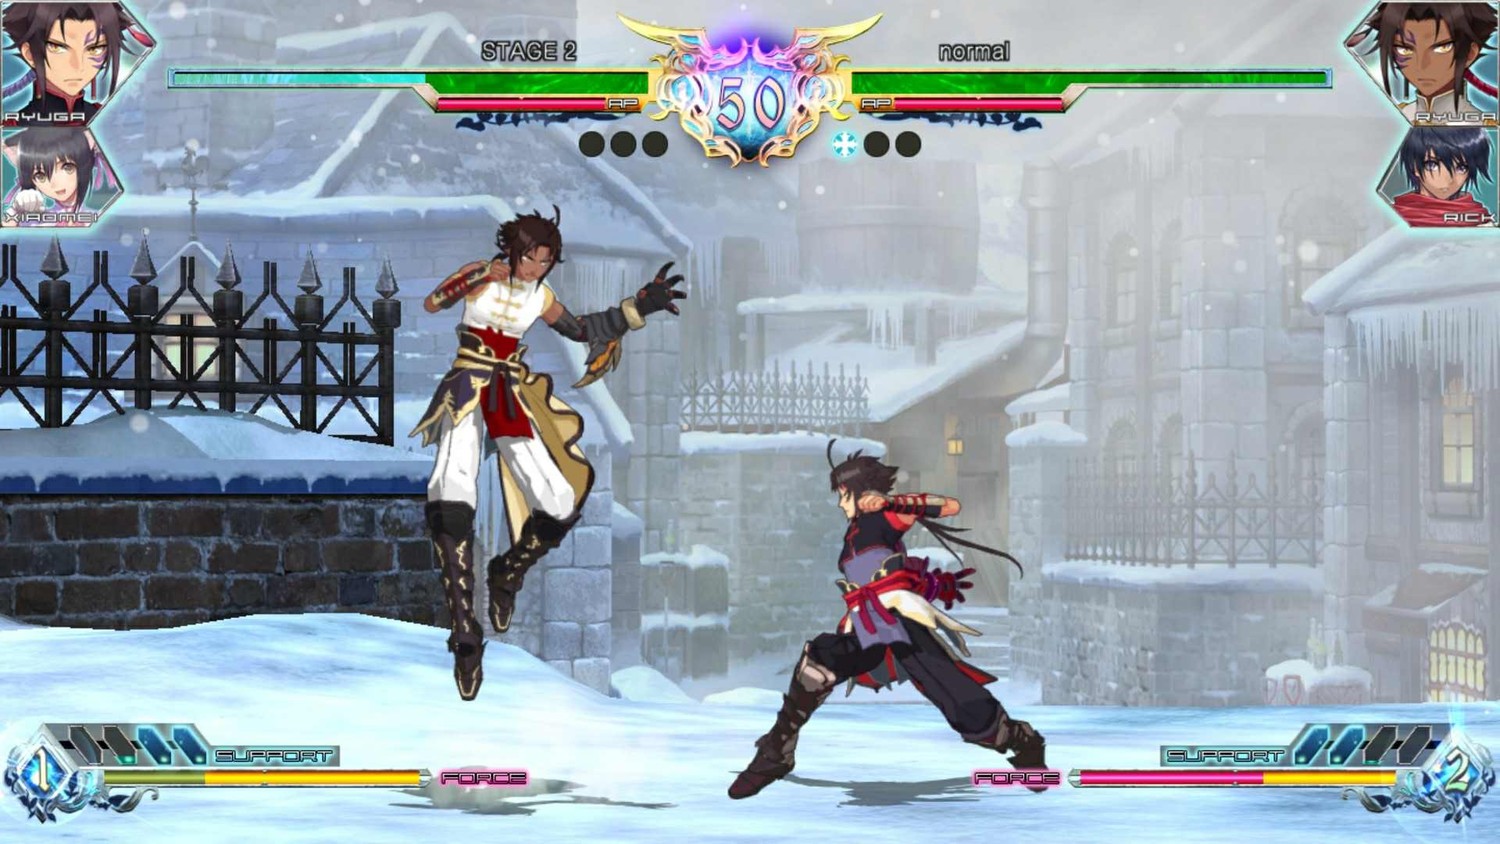 Blade Arcus from Shining: Battle Arena - Скриншот 3